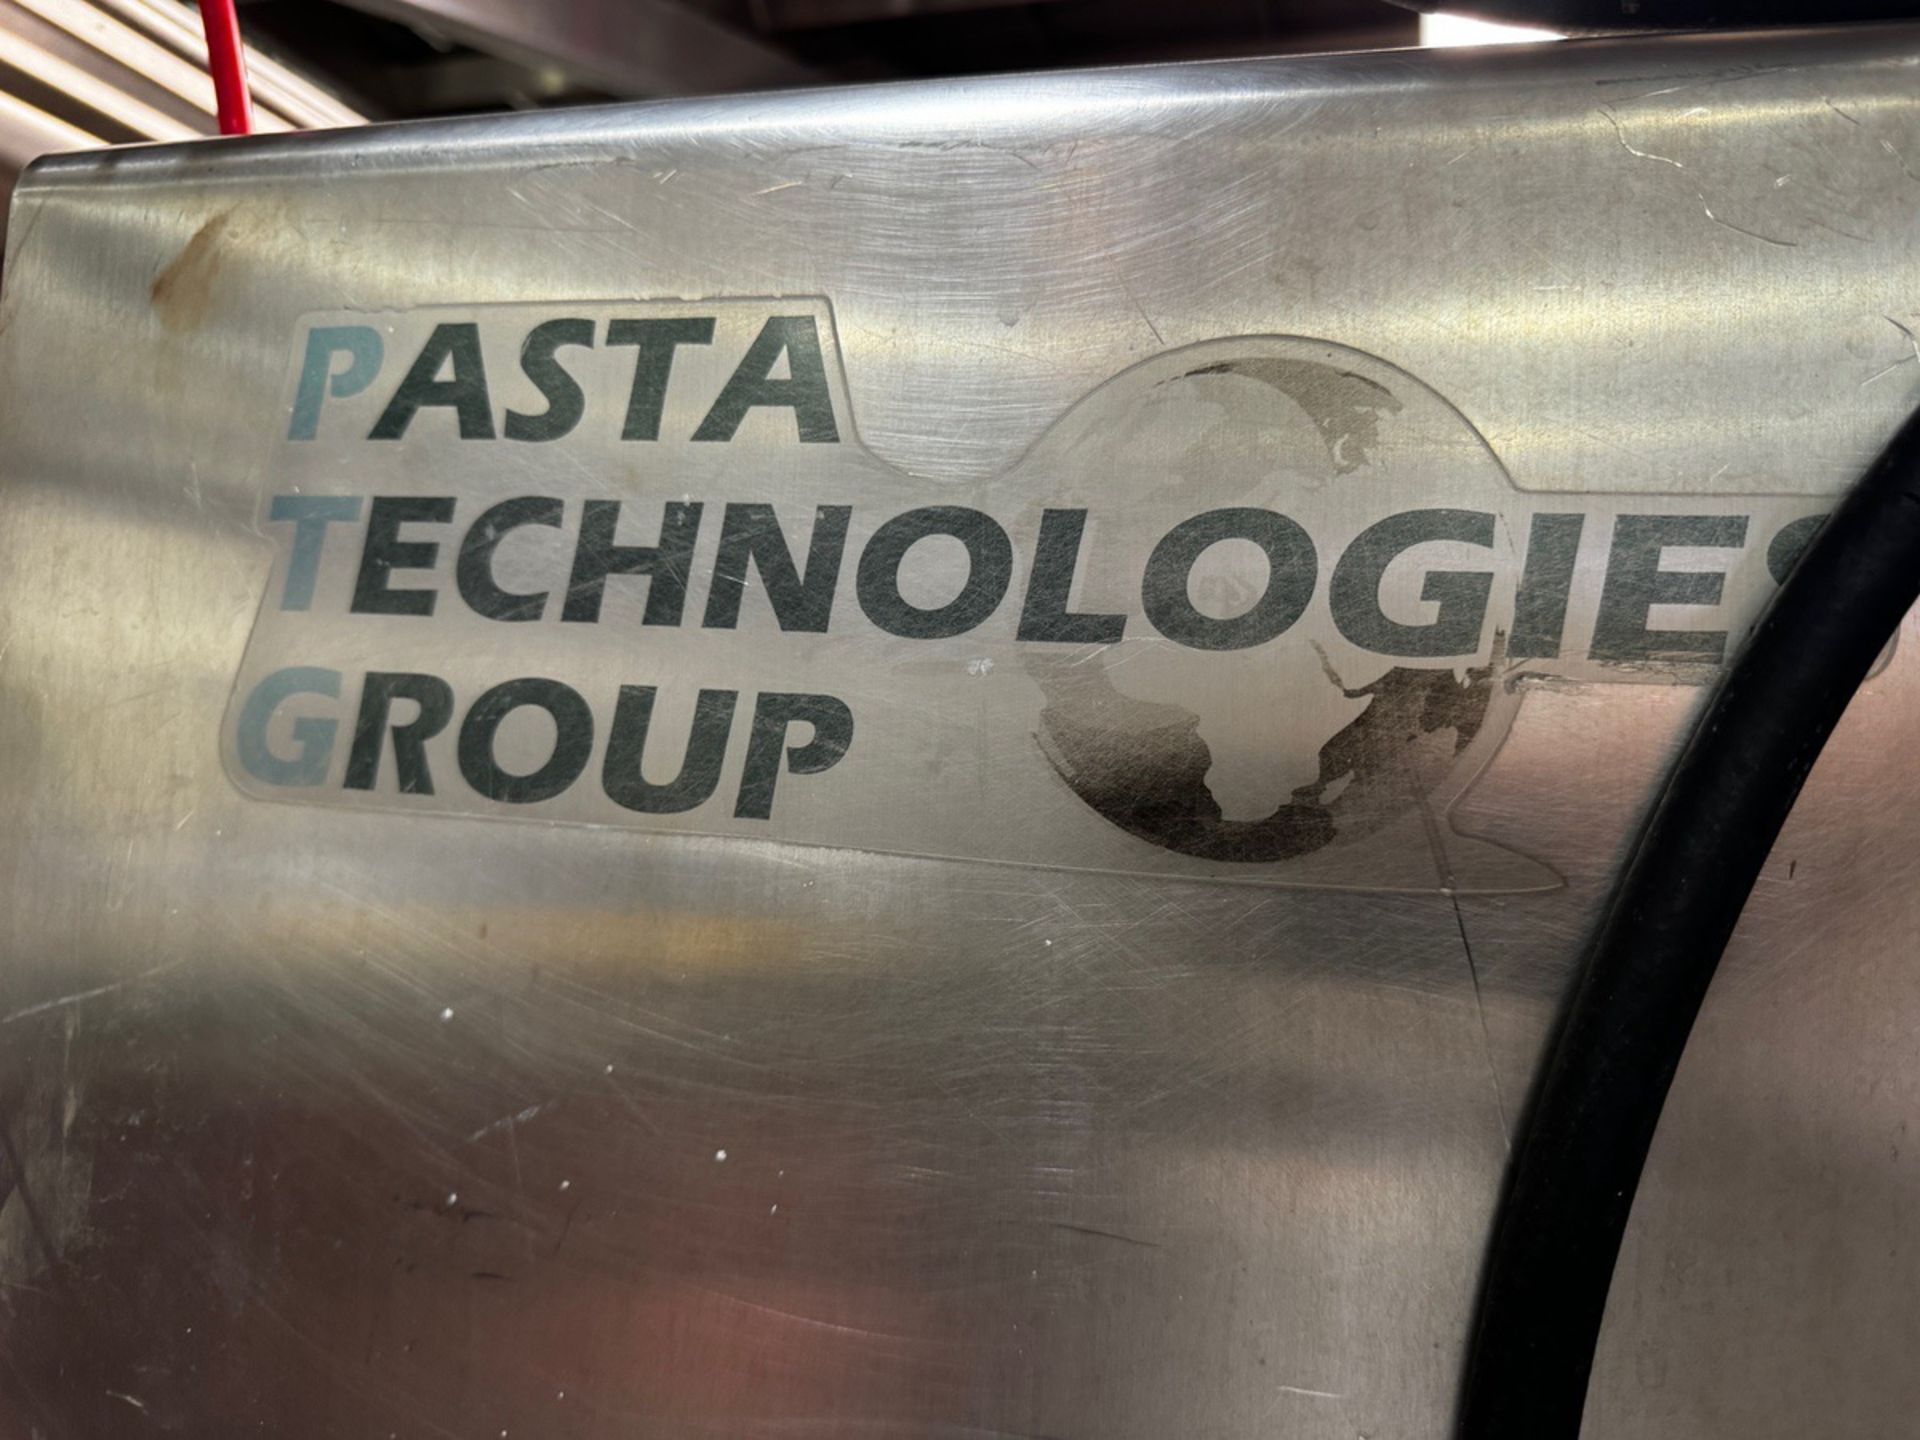 2018 Pasta Technologies FA549 Pinched Product Forming Machine with Tor - Subj to Bulk | Rig Fee $750 - Image 3 of 3